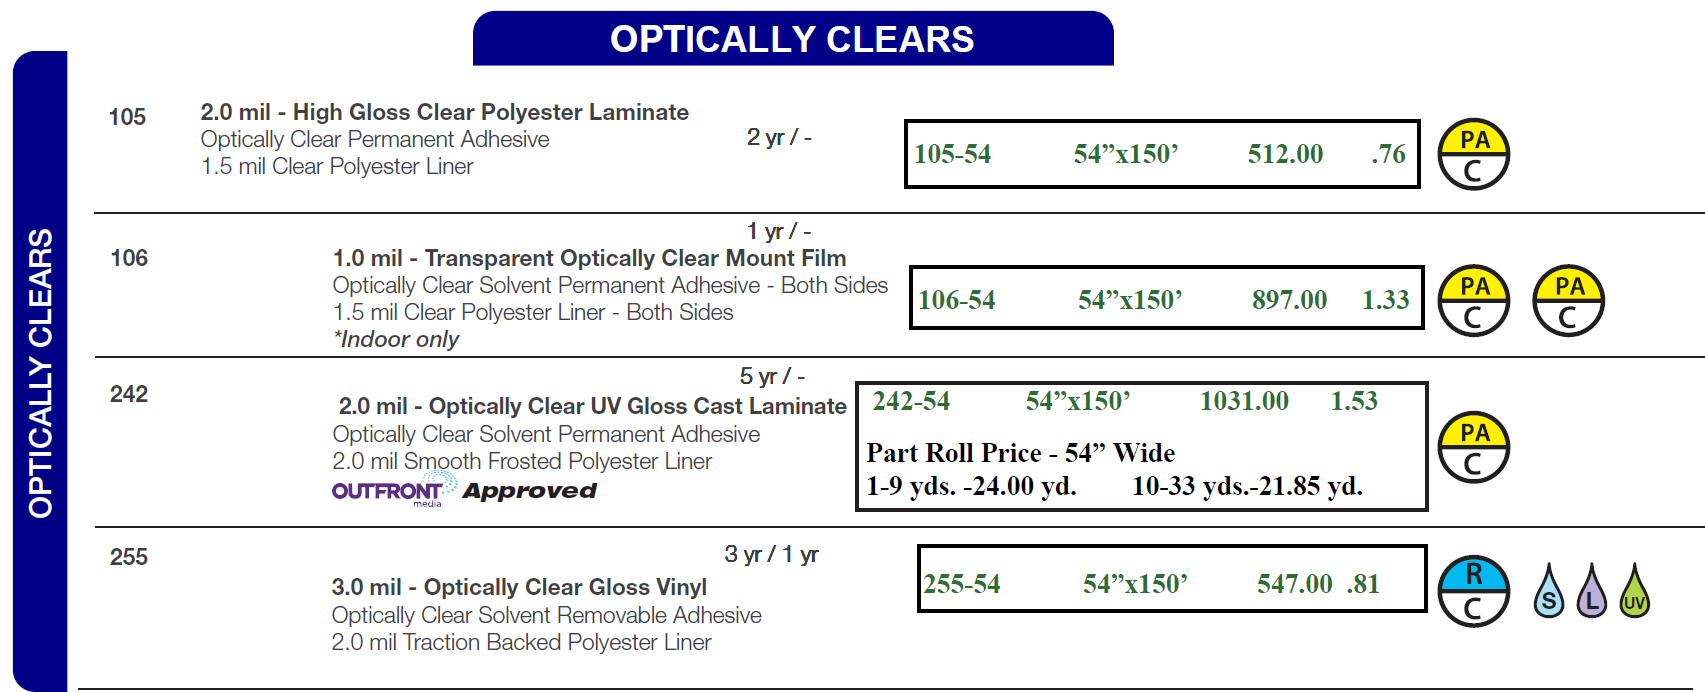 Concept optic clear 2023 - Digital Print Optically Clears